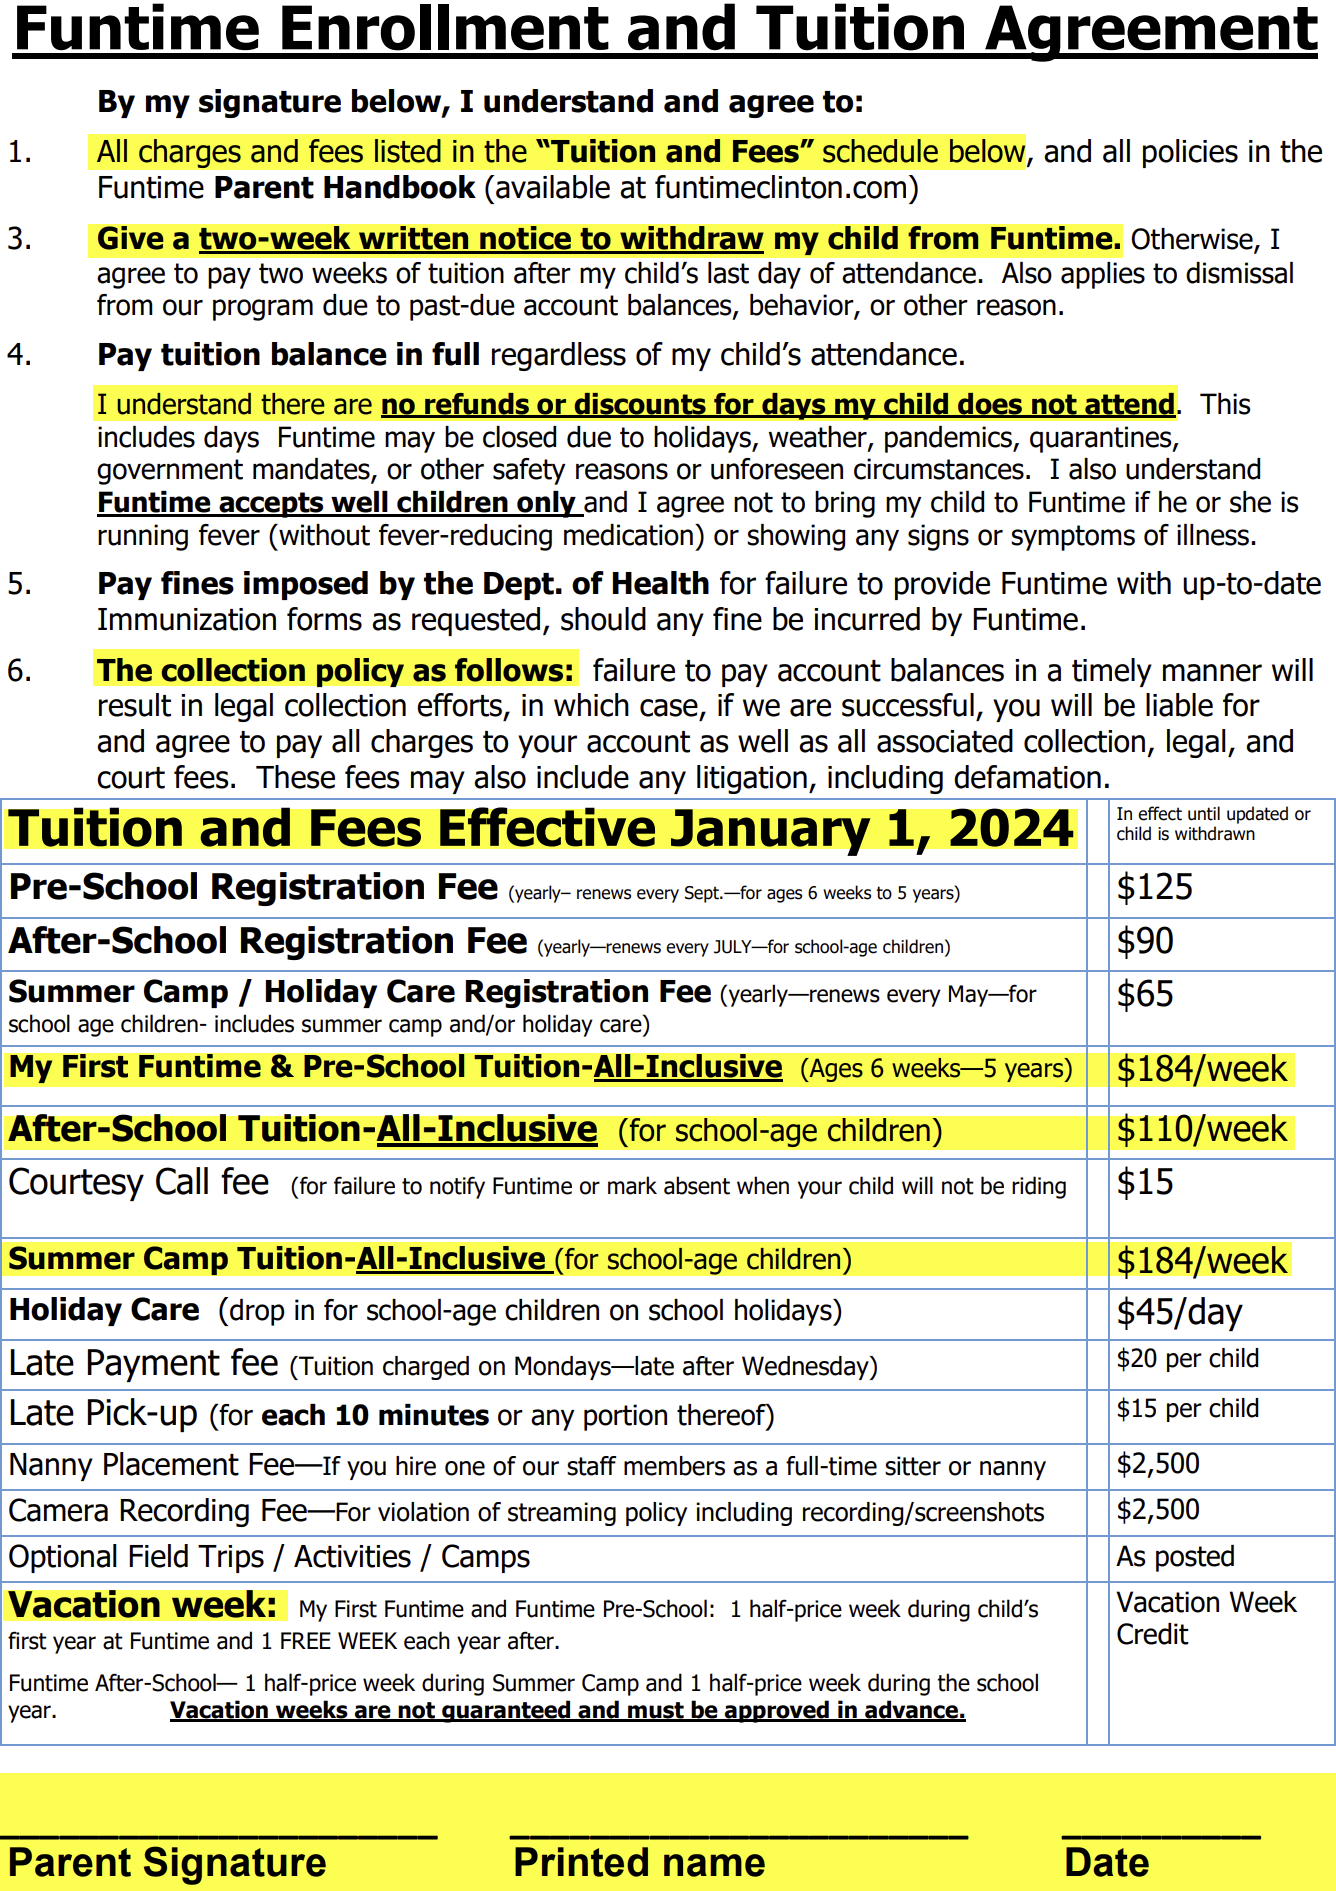 Funtime Enrollment and Tuition Agreement, Updated January 2024